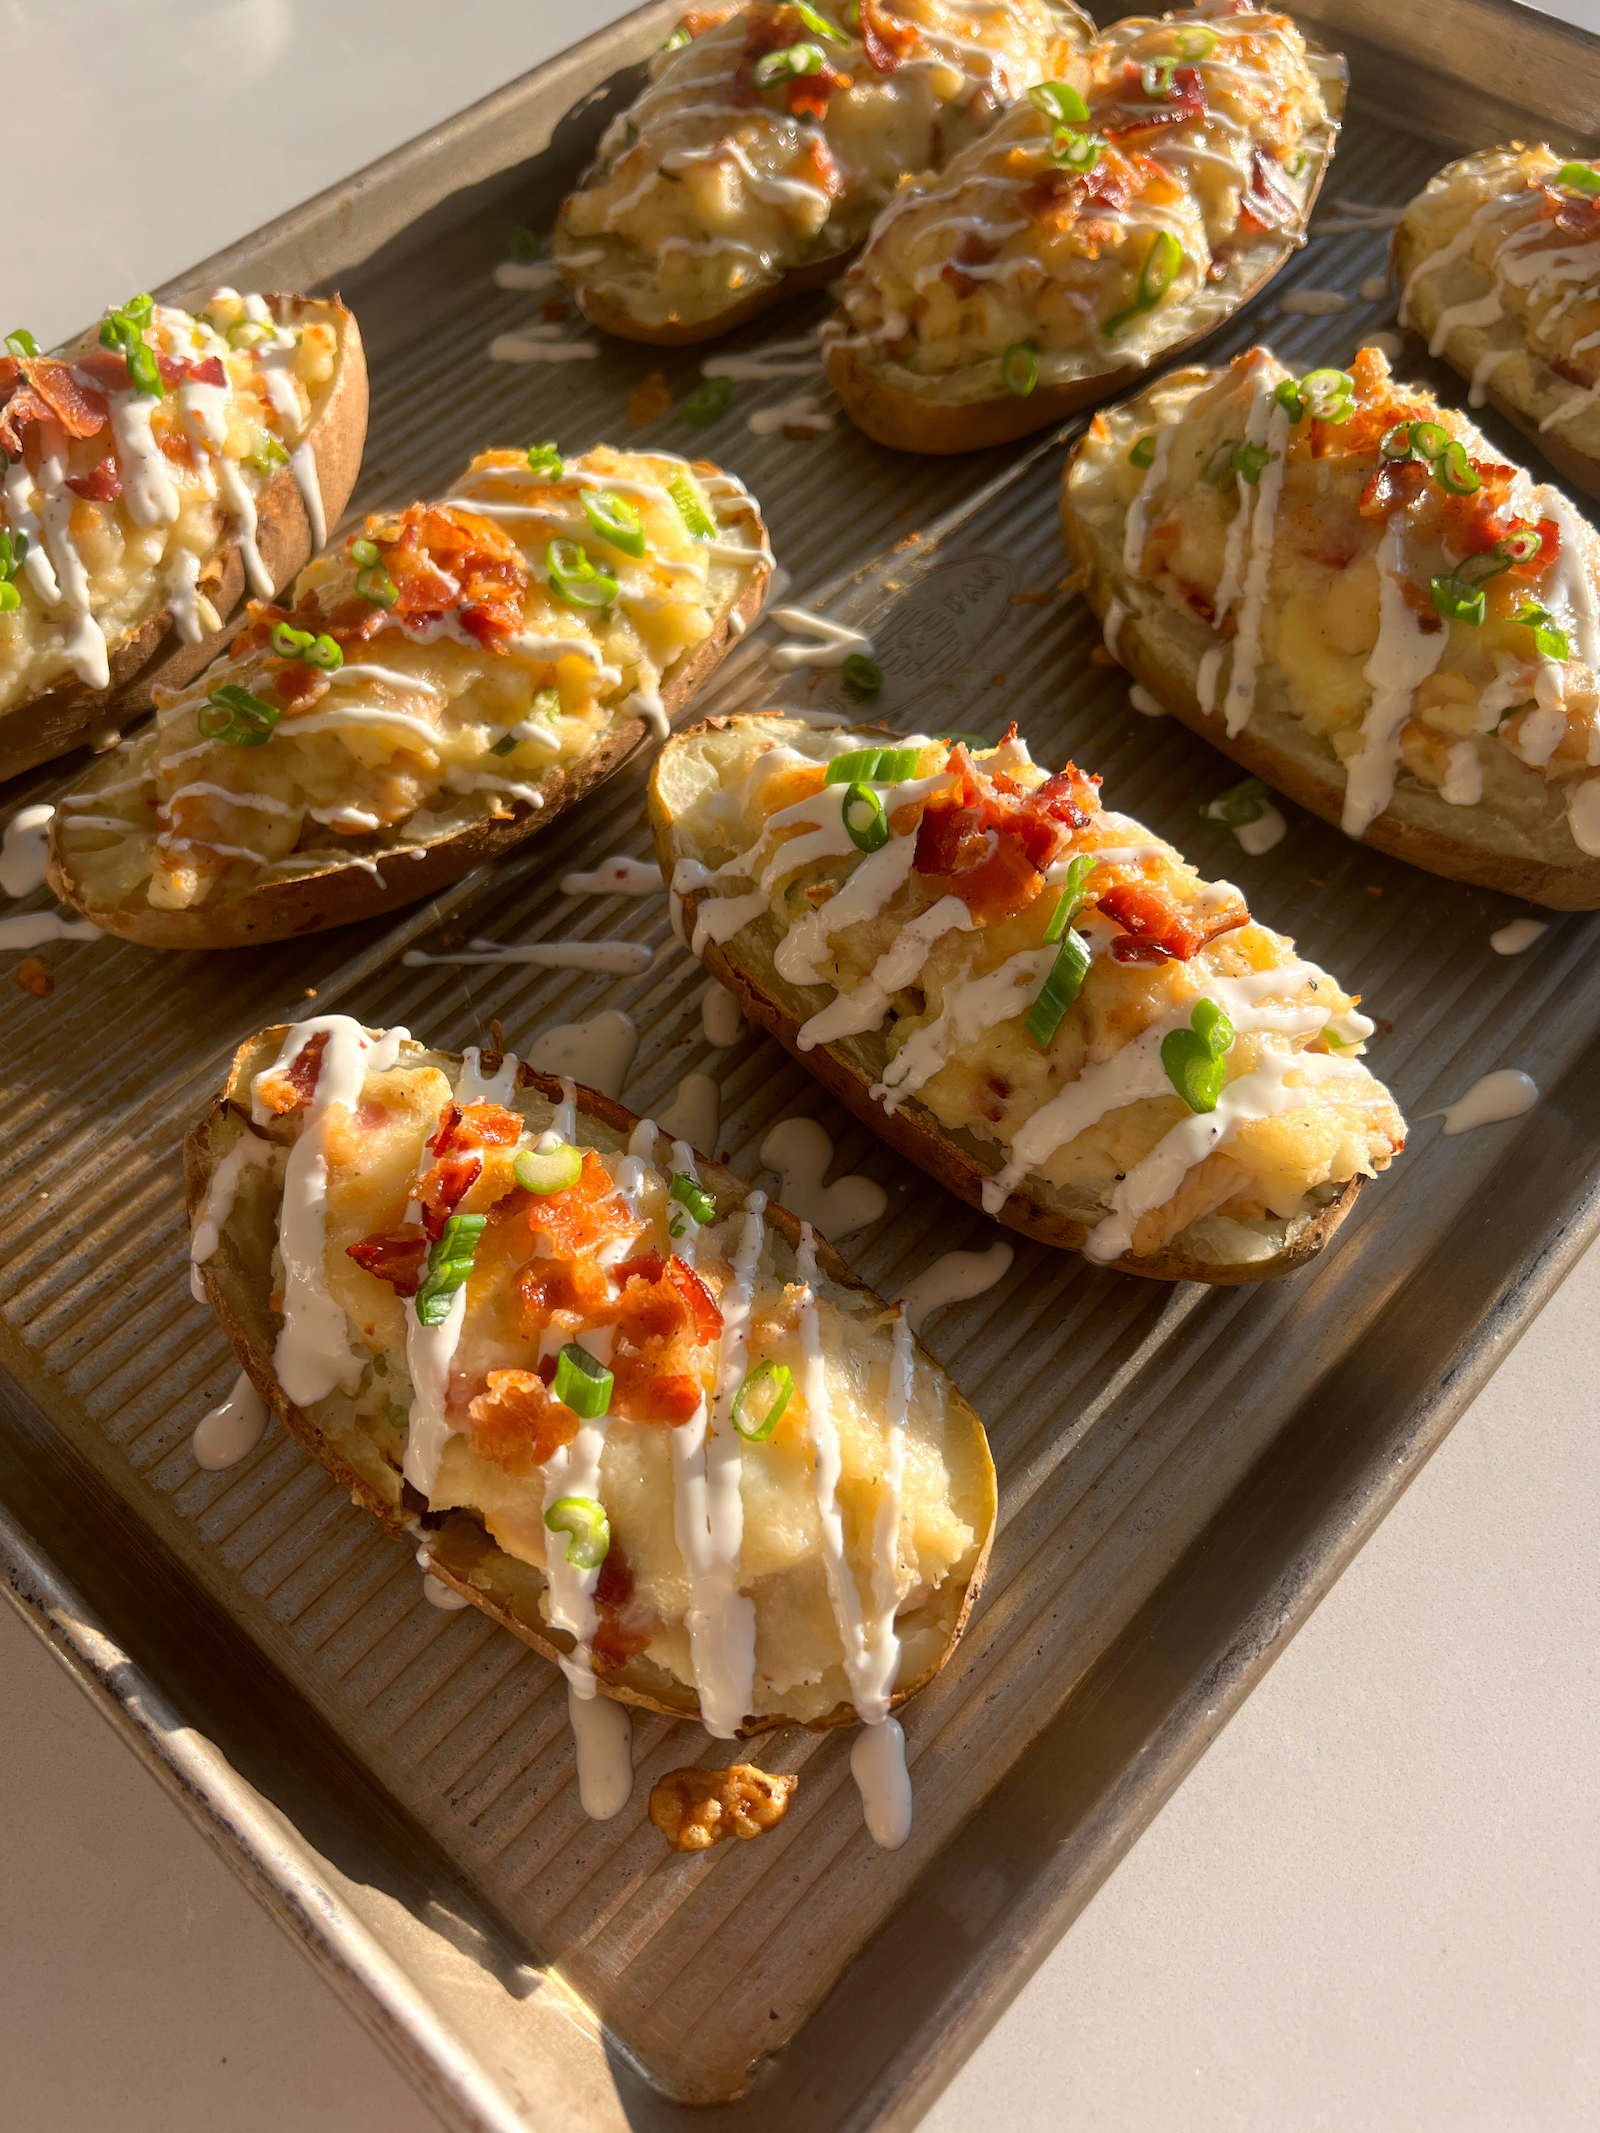 Chicken Bacon Ranch Twice-Baked Potatoes on baking sheet with garnishes